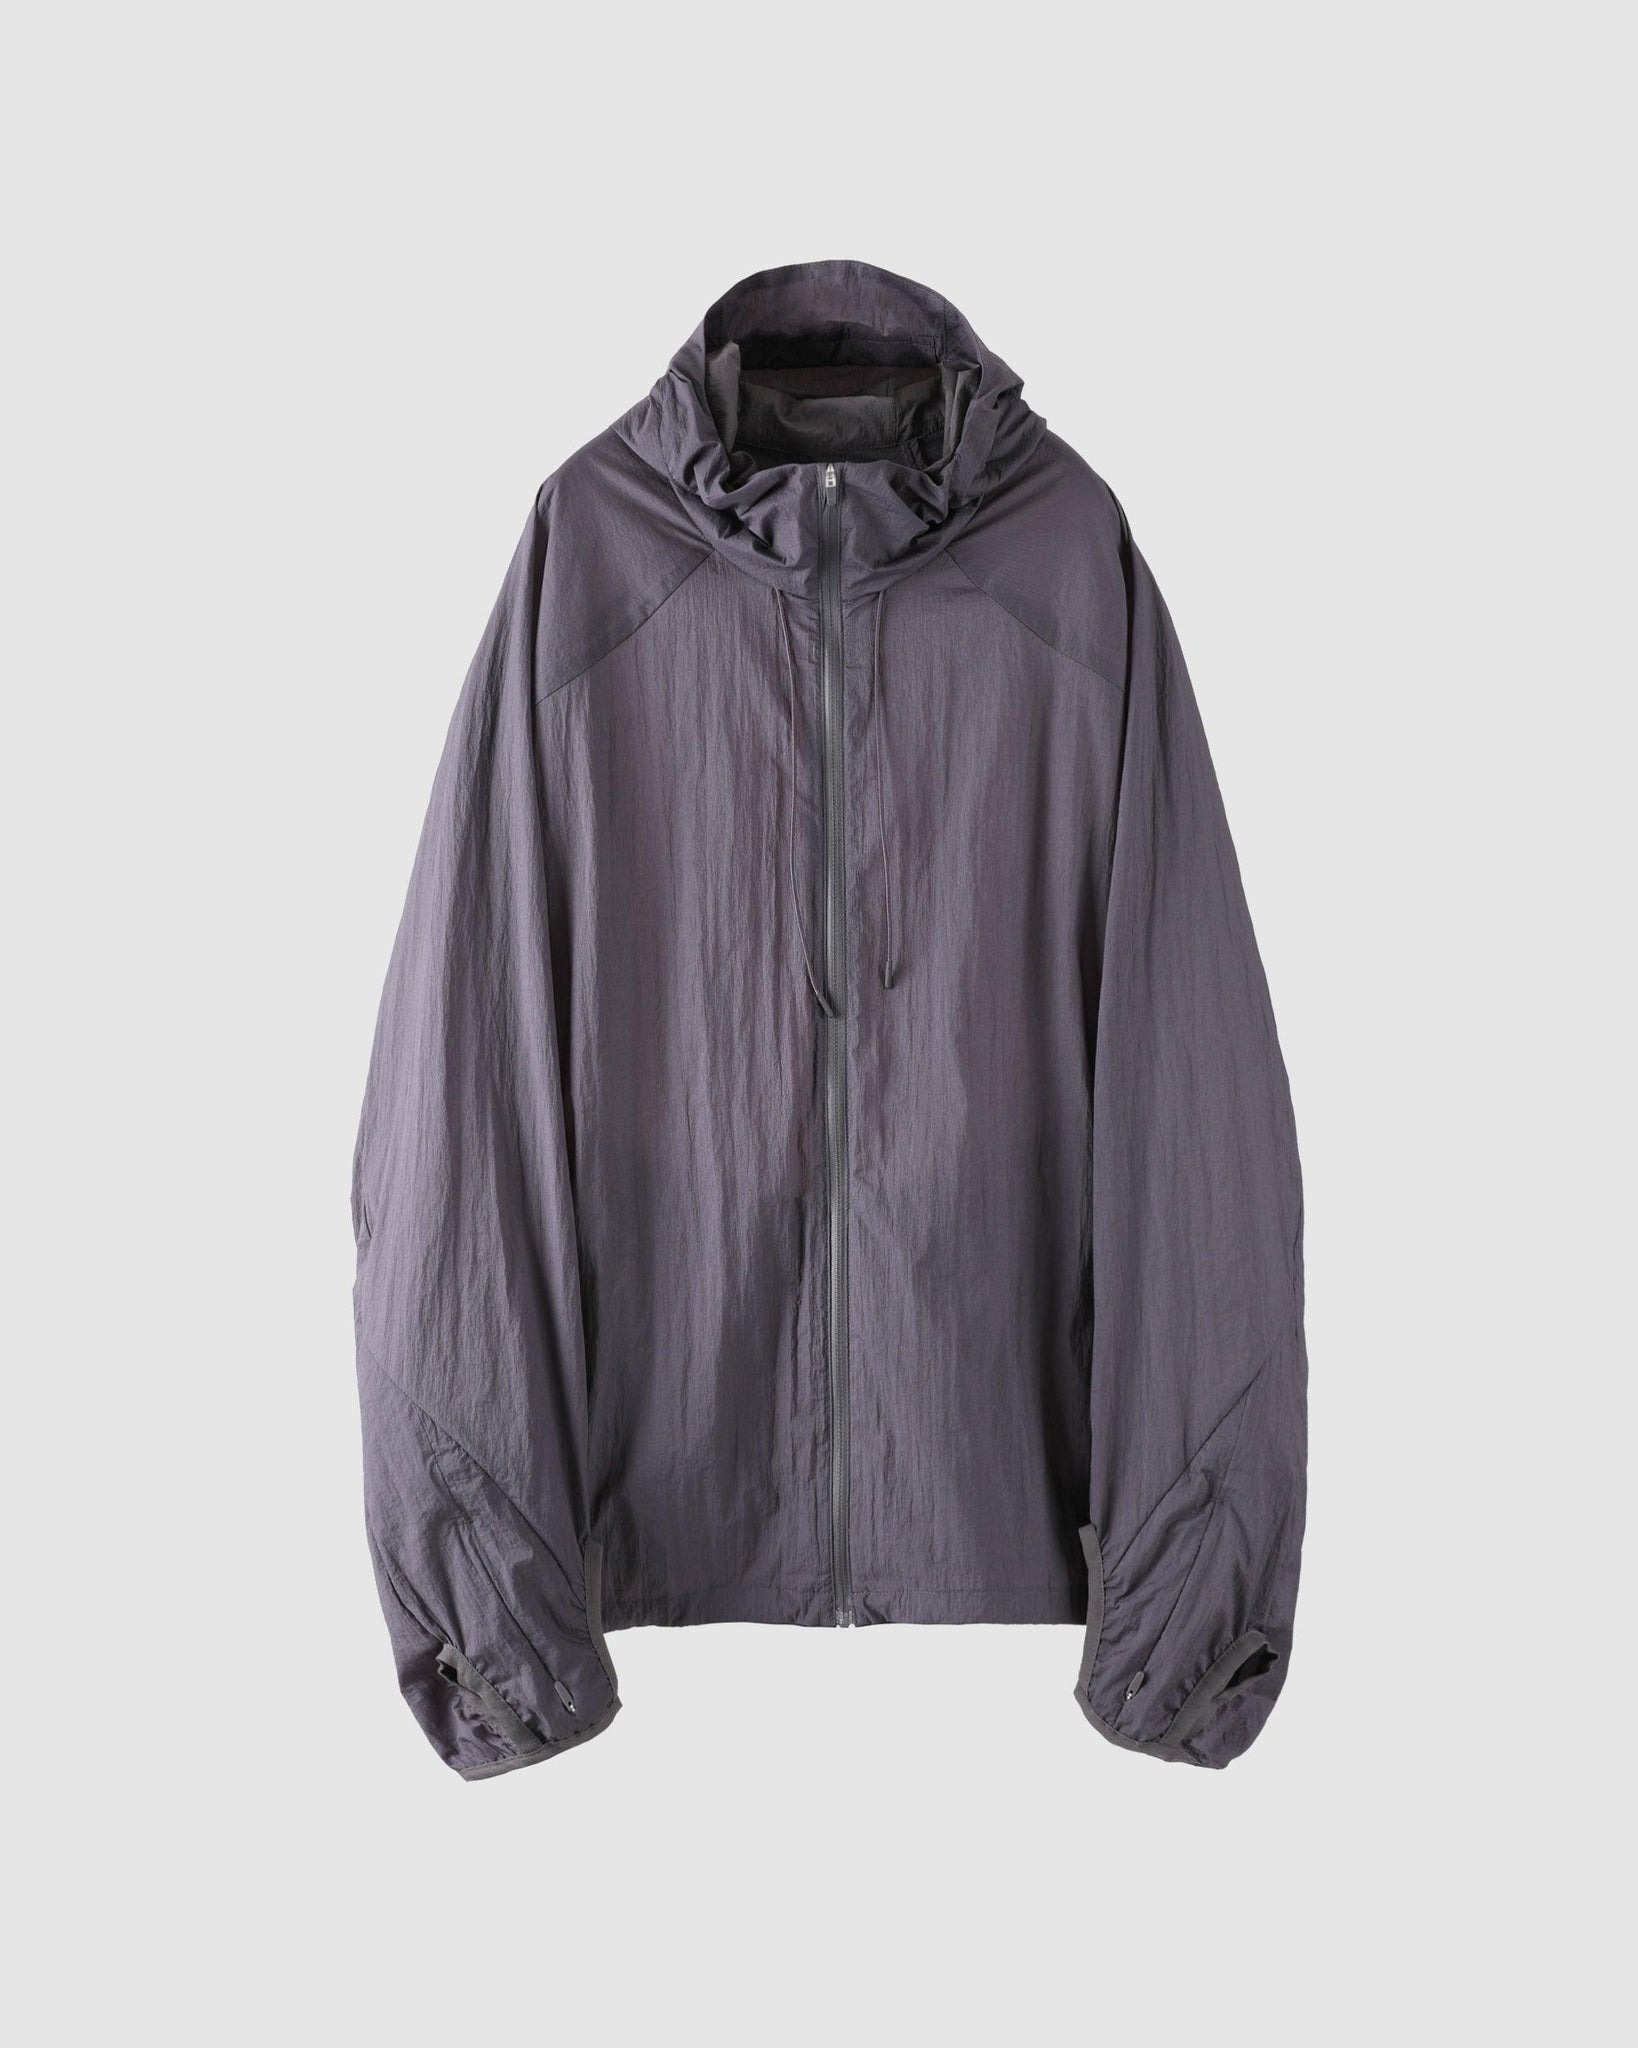 5.1 Technical Jacket Right Purple - {{ collection.title }} - Chinatown Country Club 